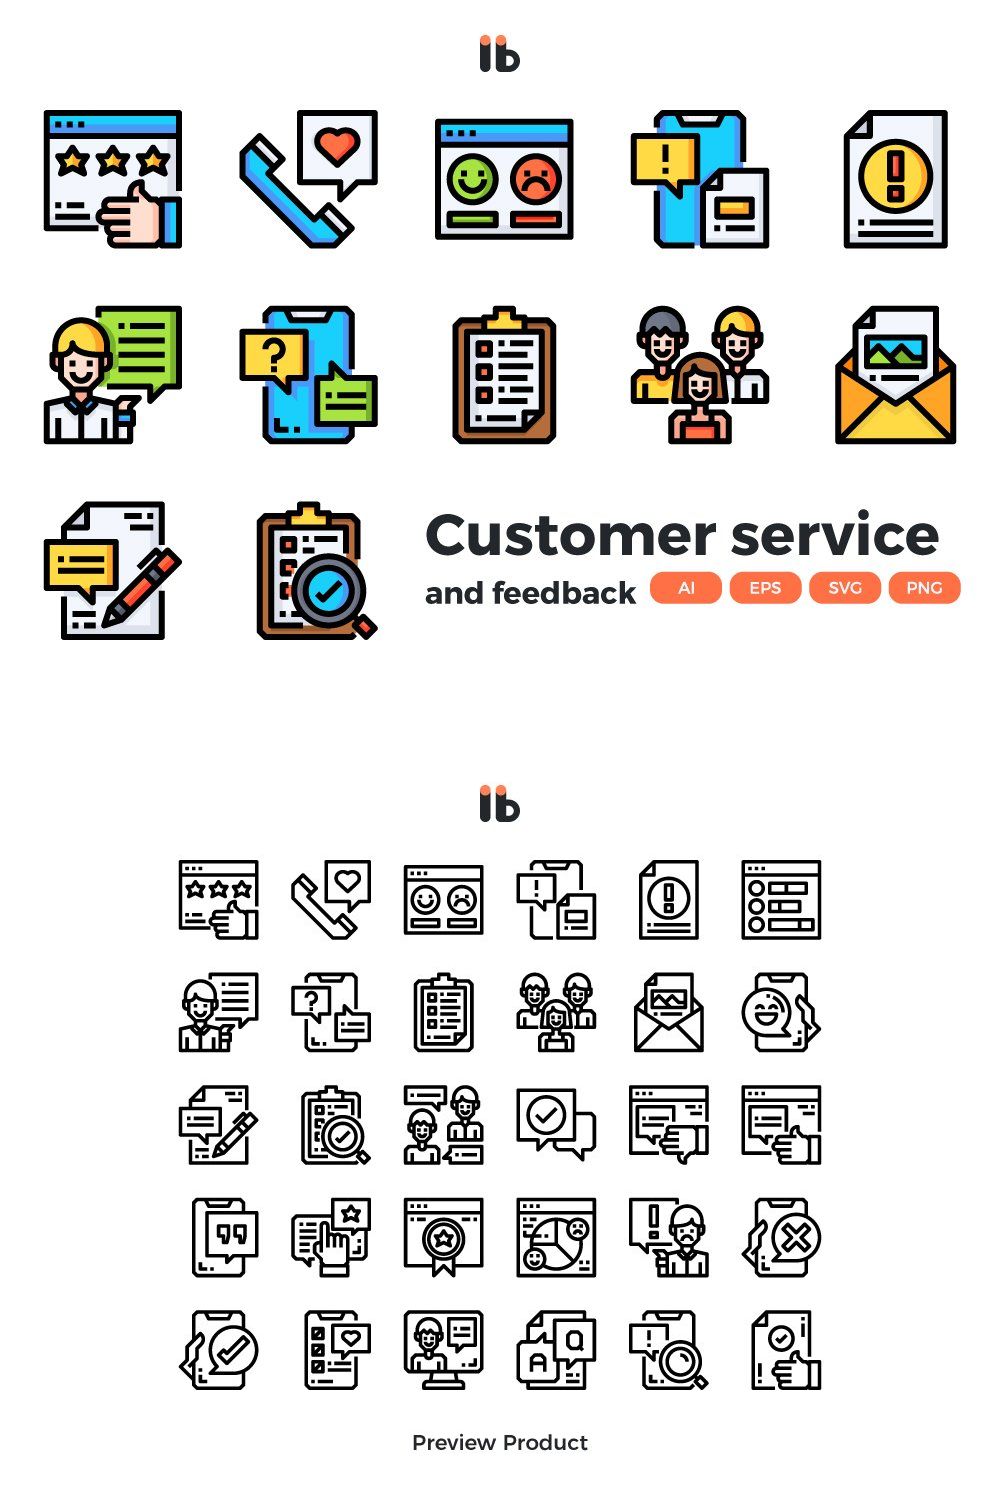 30 Customer service and feedback pinterest preview image.